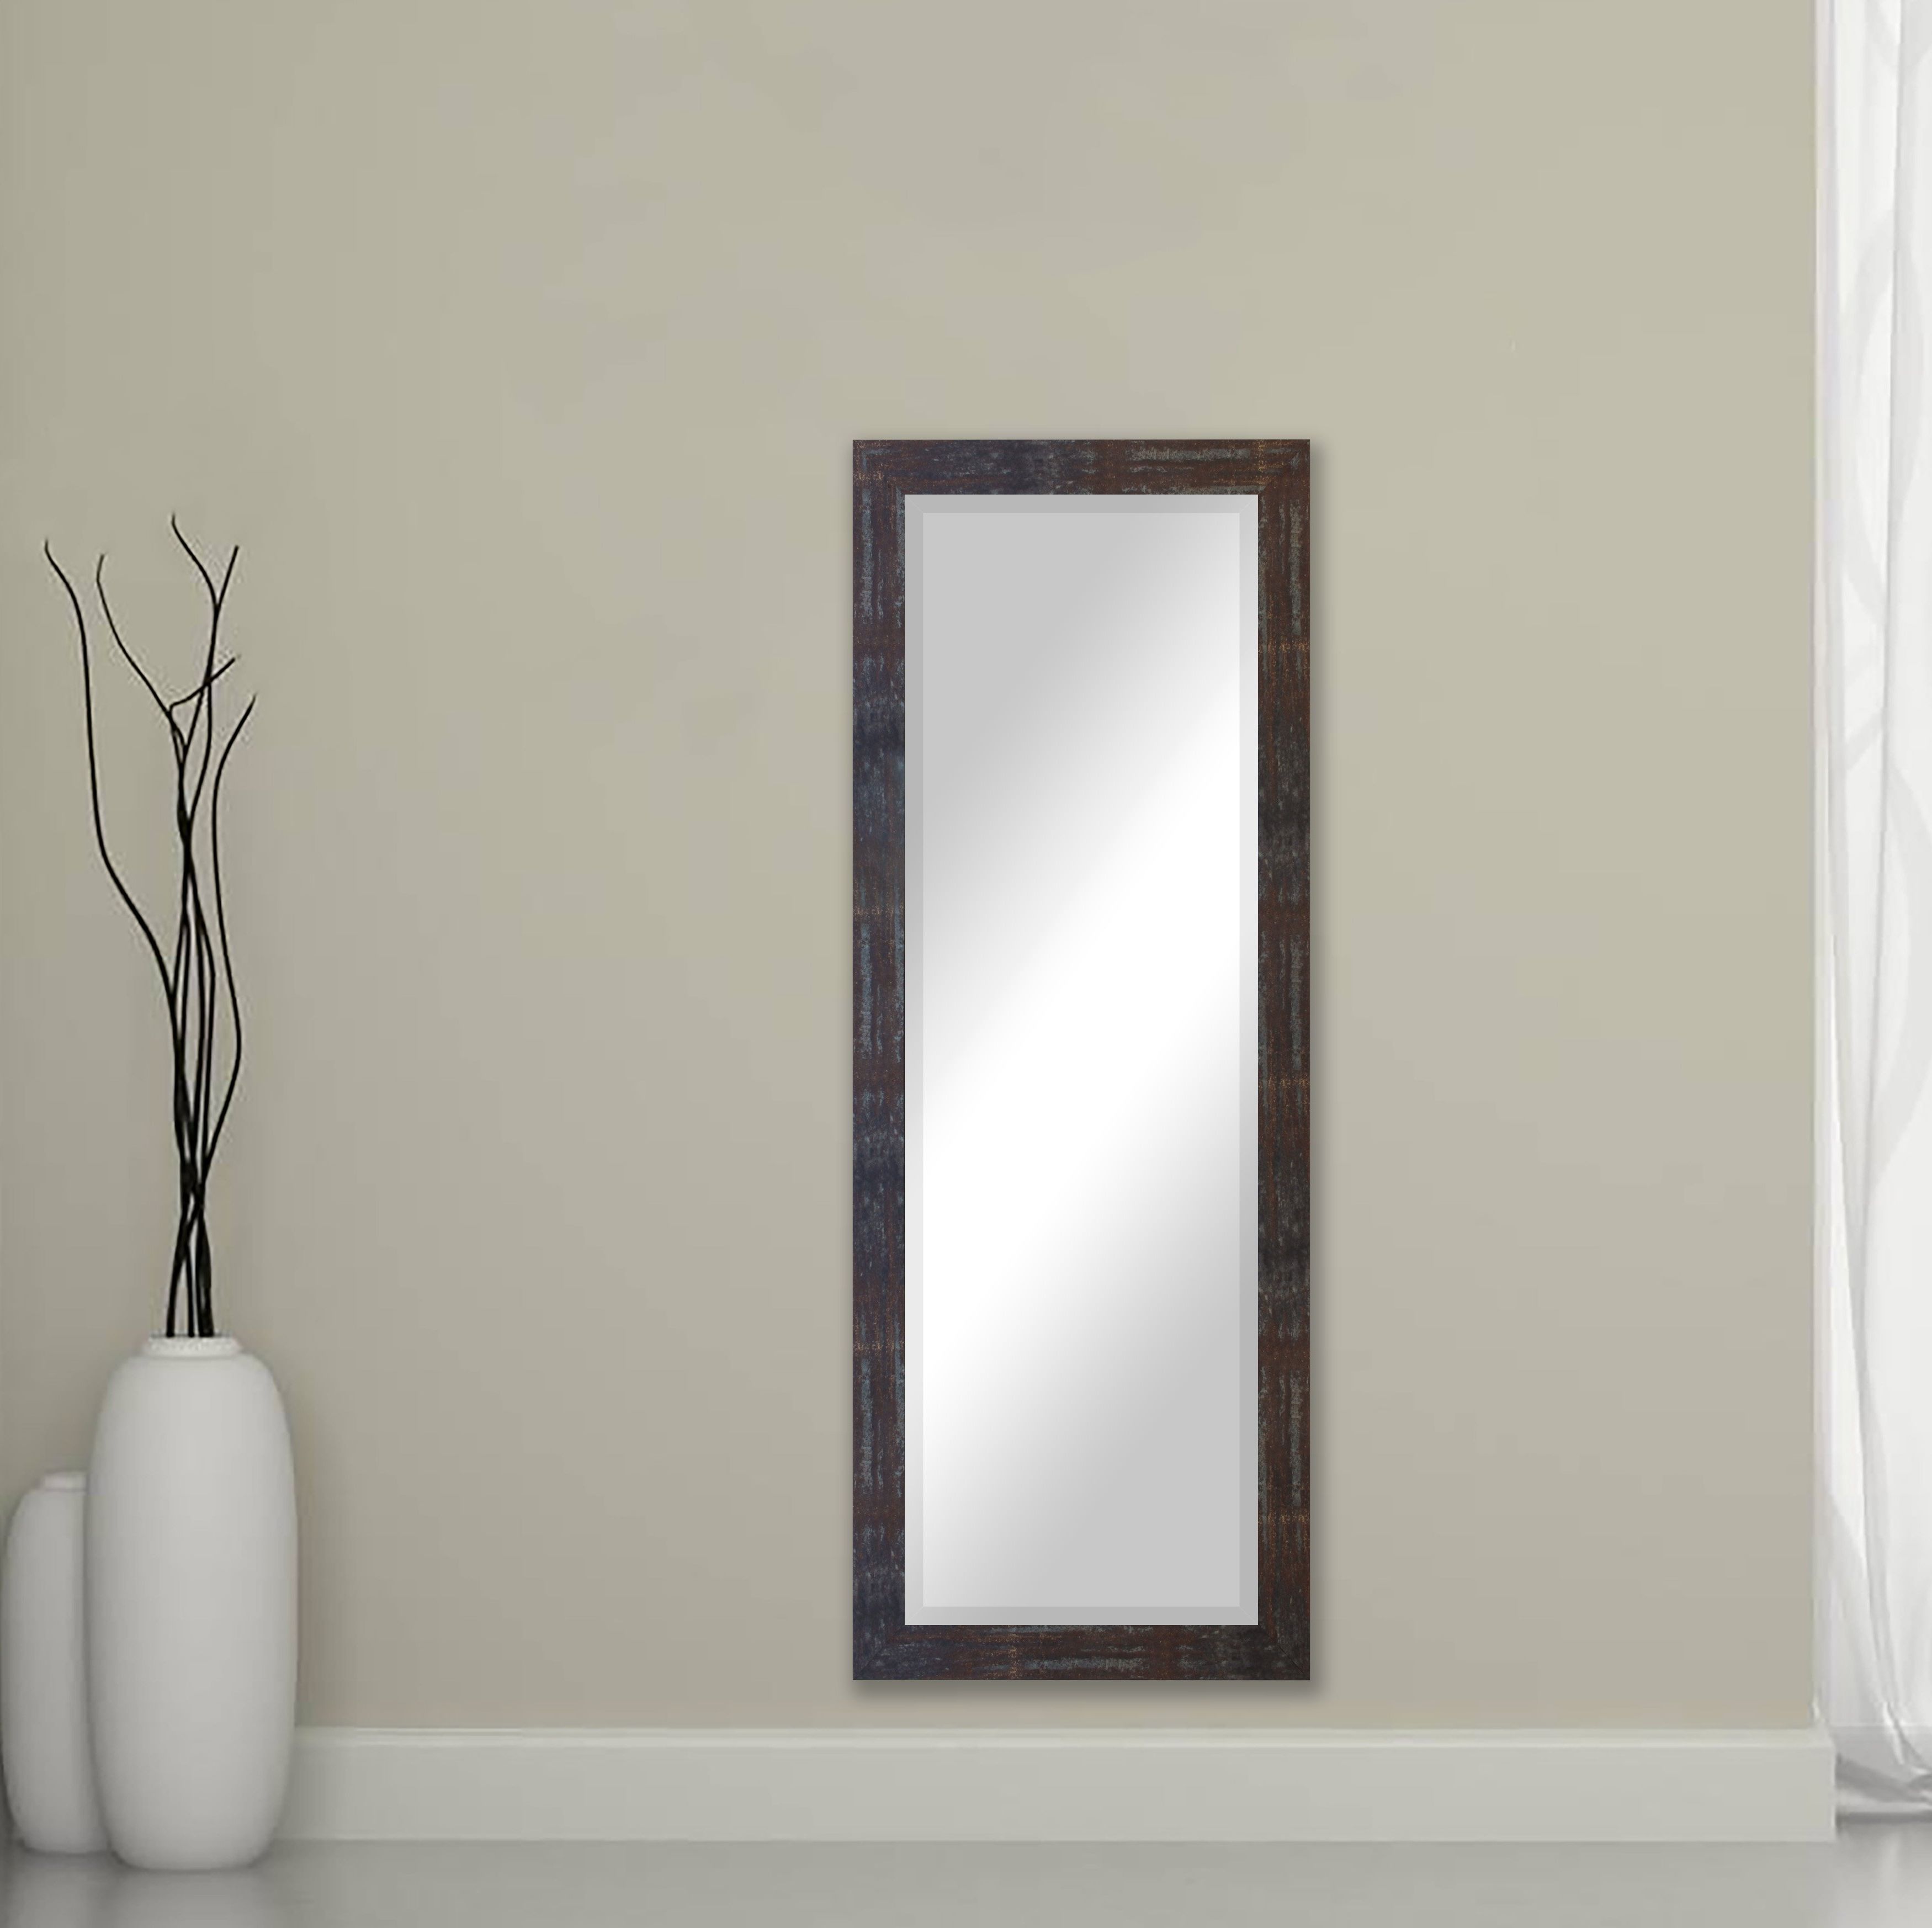 2020 Calfee Industrial Wall Mirror Inside Industrial Wall Mirrors (View 7 of 20)